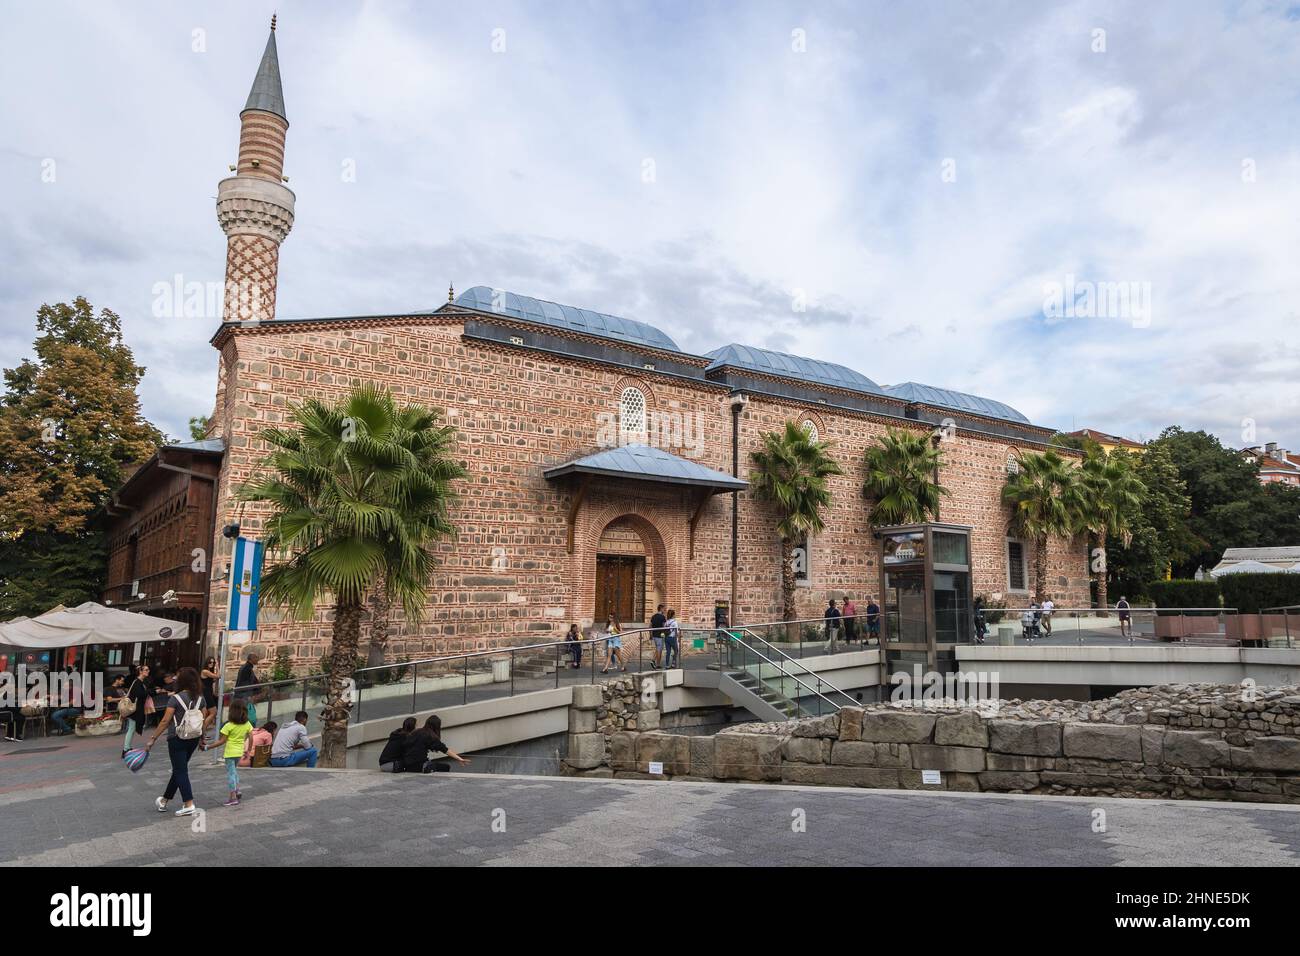 Dzhumaya Mosque also known as Cuma Camii nad ruins of ancient stadium in Plovdiv city, capital of Plovdiv Province in south-central Bulgaria Stock Photo